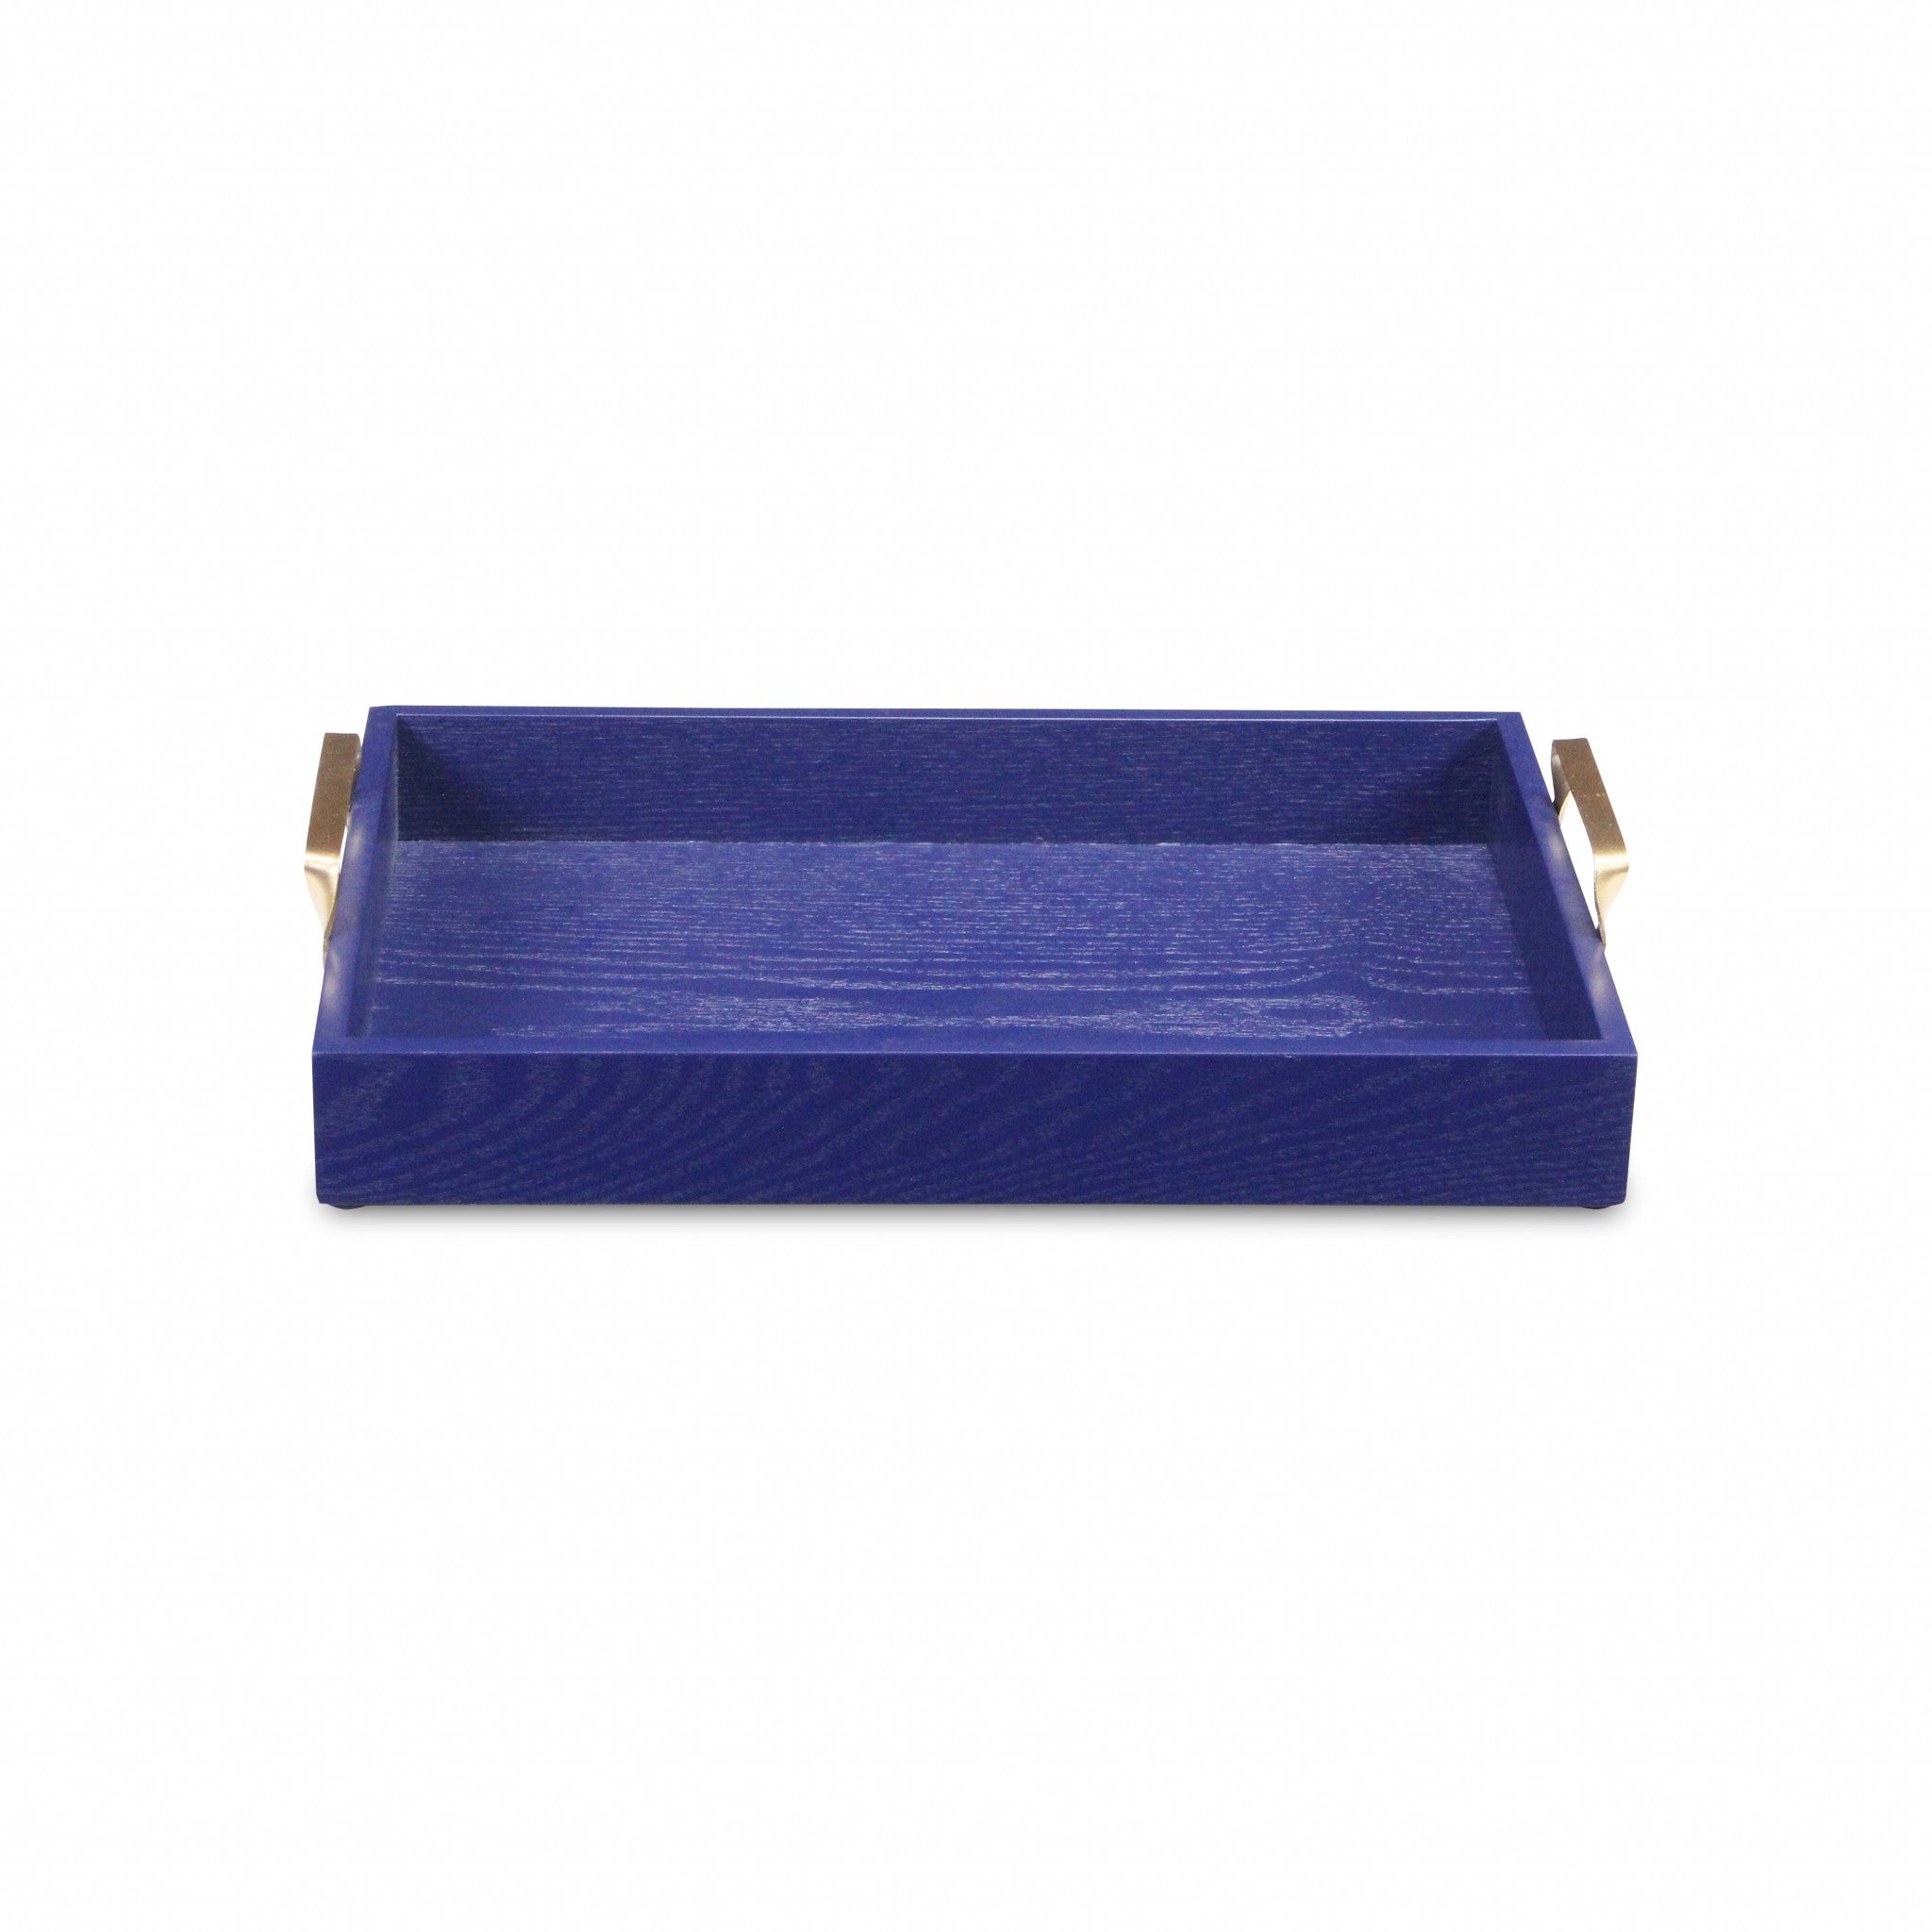 Royal Blue Wooden Tray with Gold Handles